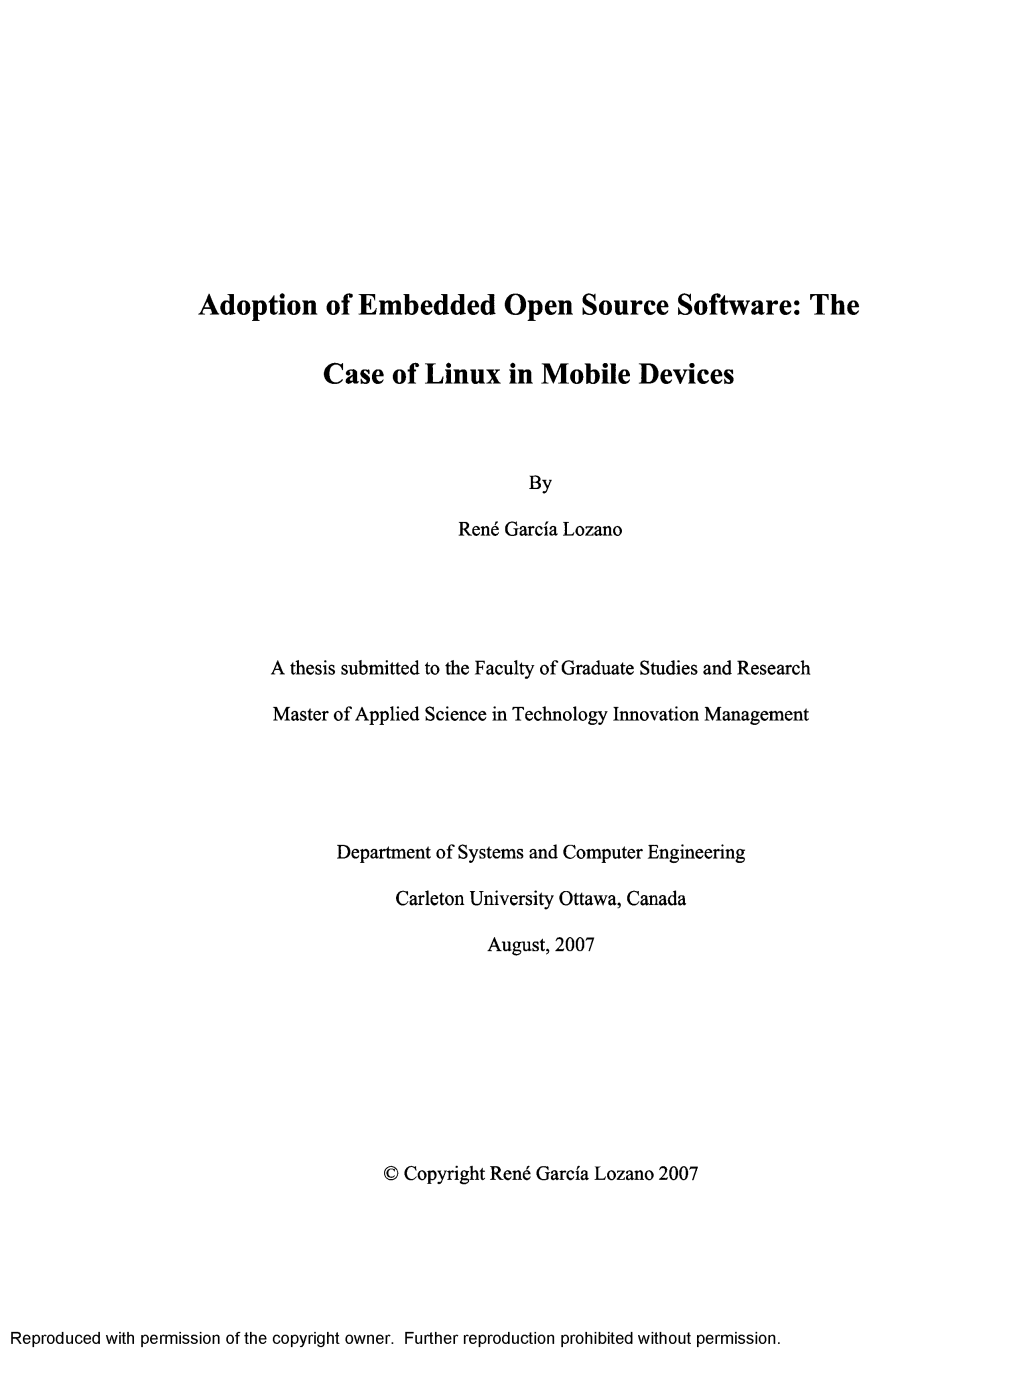 Adoption of Embedded Open Source Software: The